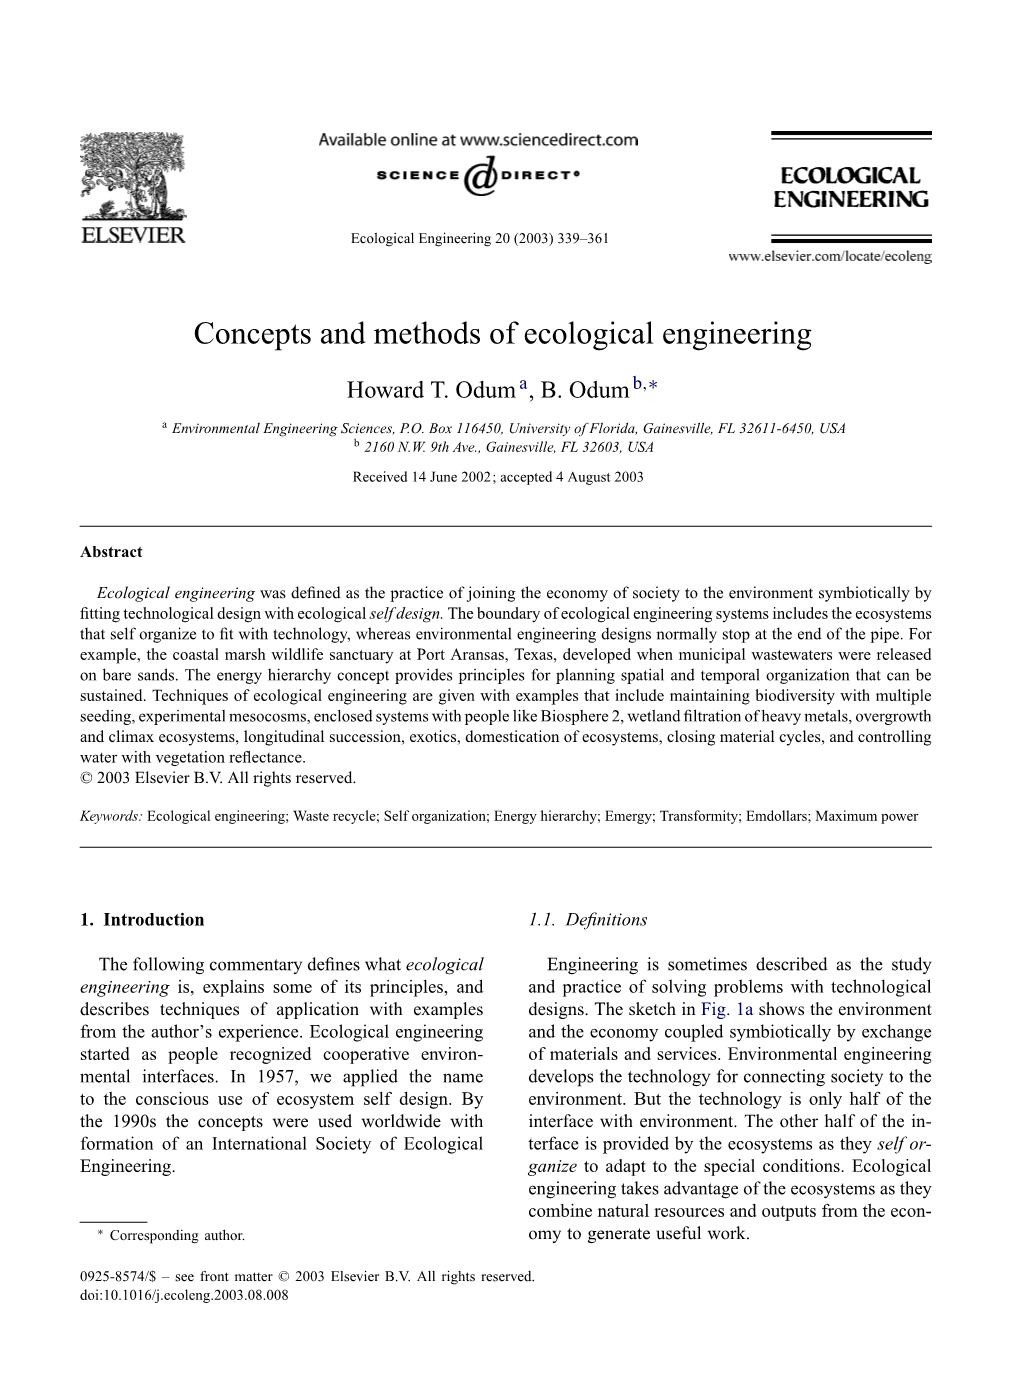 Concepts and Methods of Ecological Engineering